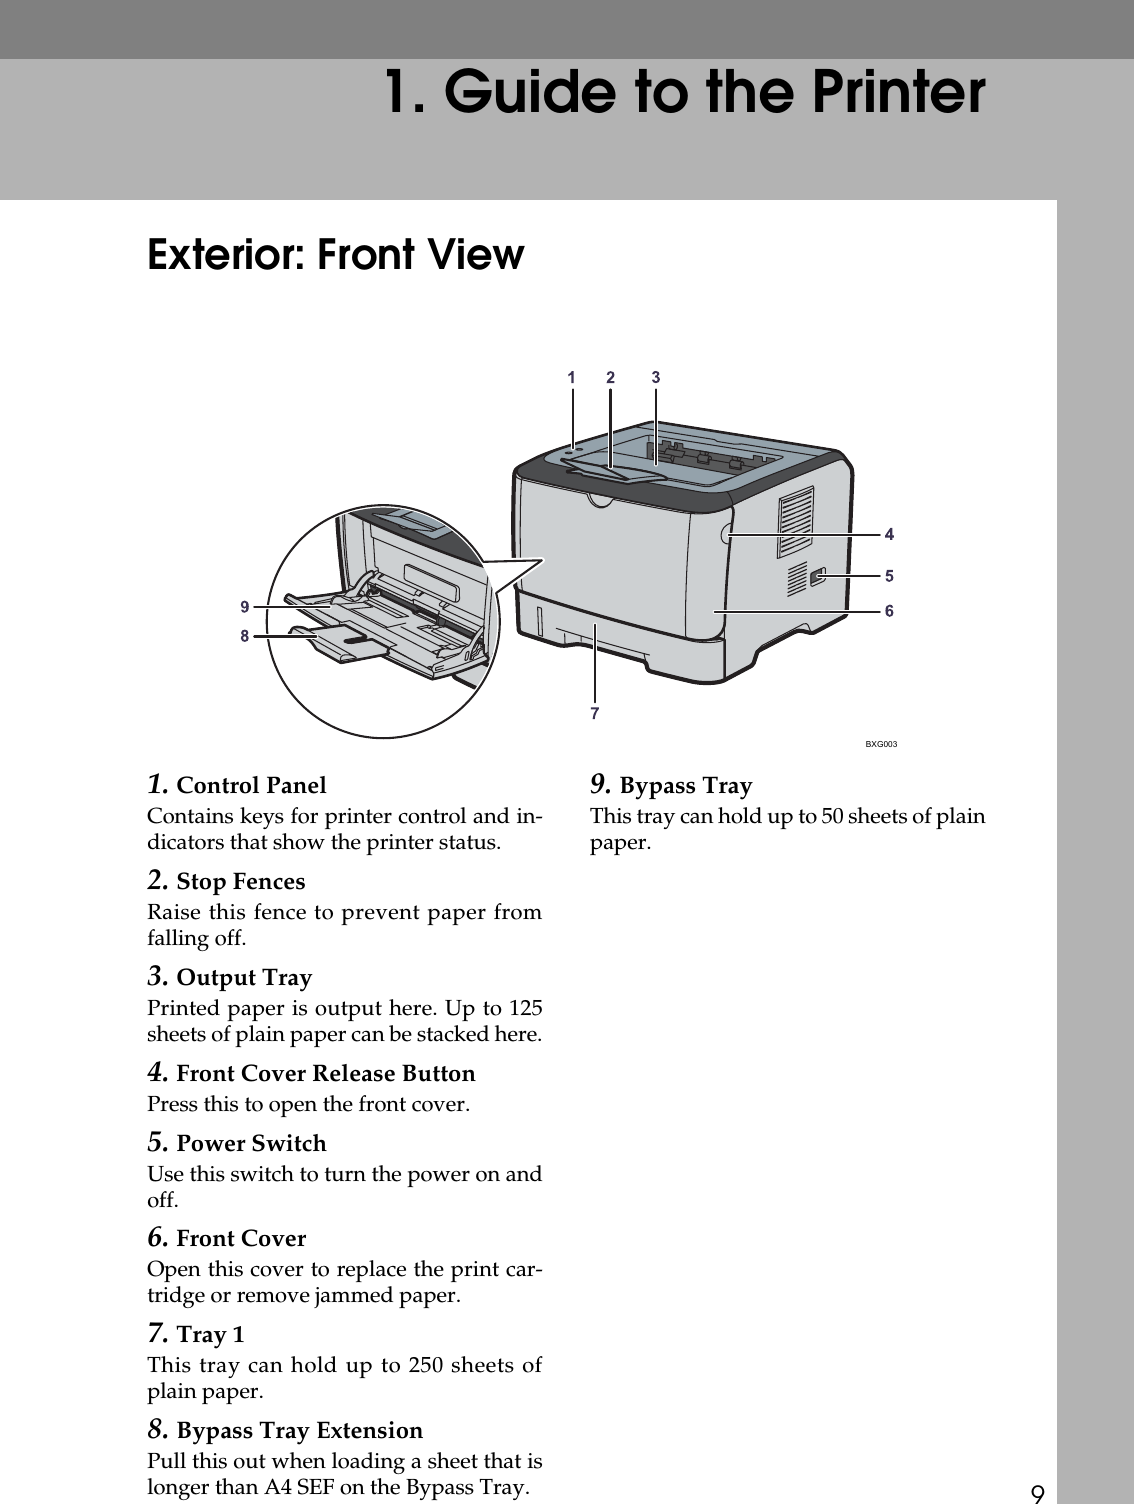 91. Guide to the PrinterExterior: Front View1. Control PanelContains keys for printer control and in-dicators that show the printer status.2. Stop FencesRaise this fence to prevent paper fromfalling off.3. Output TrayPrinted paper is output here. Up to 125sheets of plain paper can be stacked here.4. Front Cover Release ButtonPress this to open the front cover.5. Power SwitchUse this switch to turn the power on andoff.6. Front CoverOpen this cover to replace the print car-tridge or remove jammed paper.7. Tray 1This tray can hold up to 250 sheets ofplain paper.8. Bypass Tray ExtensionPull this out when loading a sheet that islonger than A4 SEF on the Bypass Tray.9. Bypass TrayThis tray can hold up to 50 sheets of plainpaper.BXG003